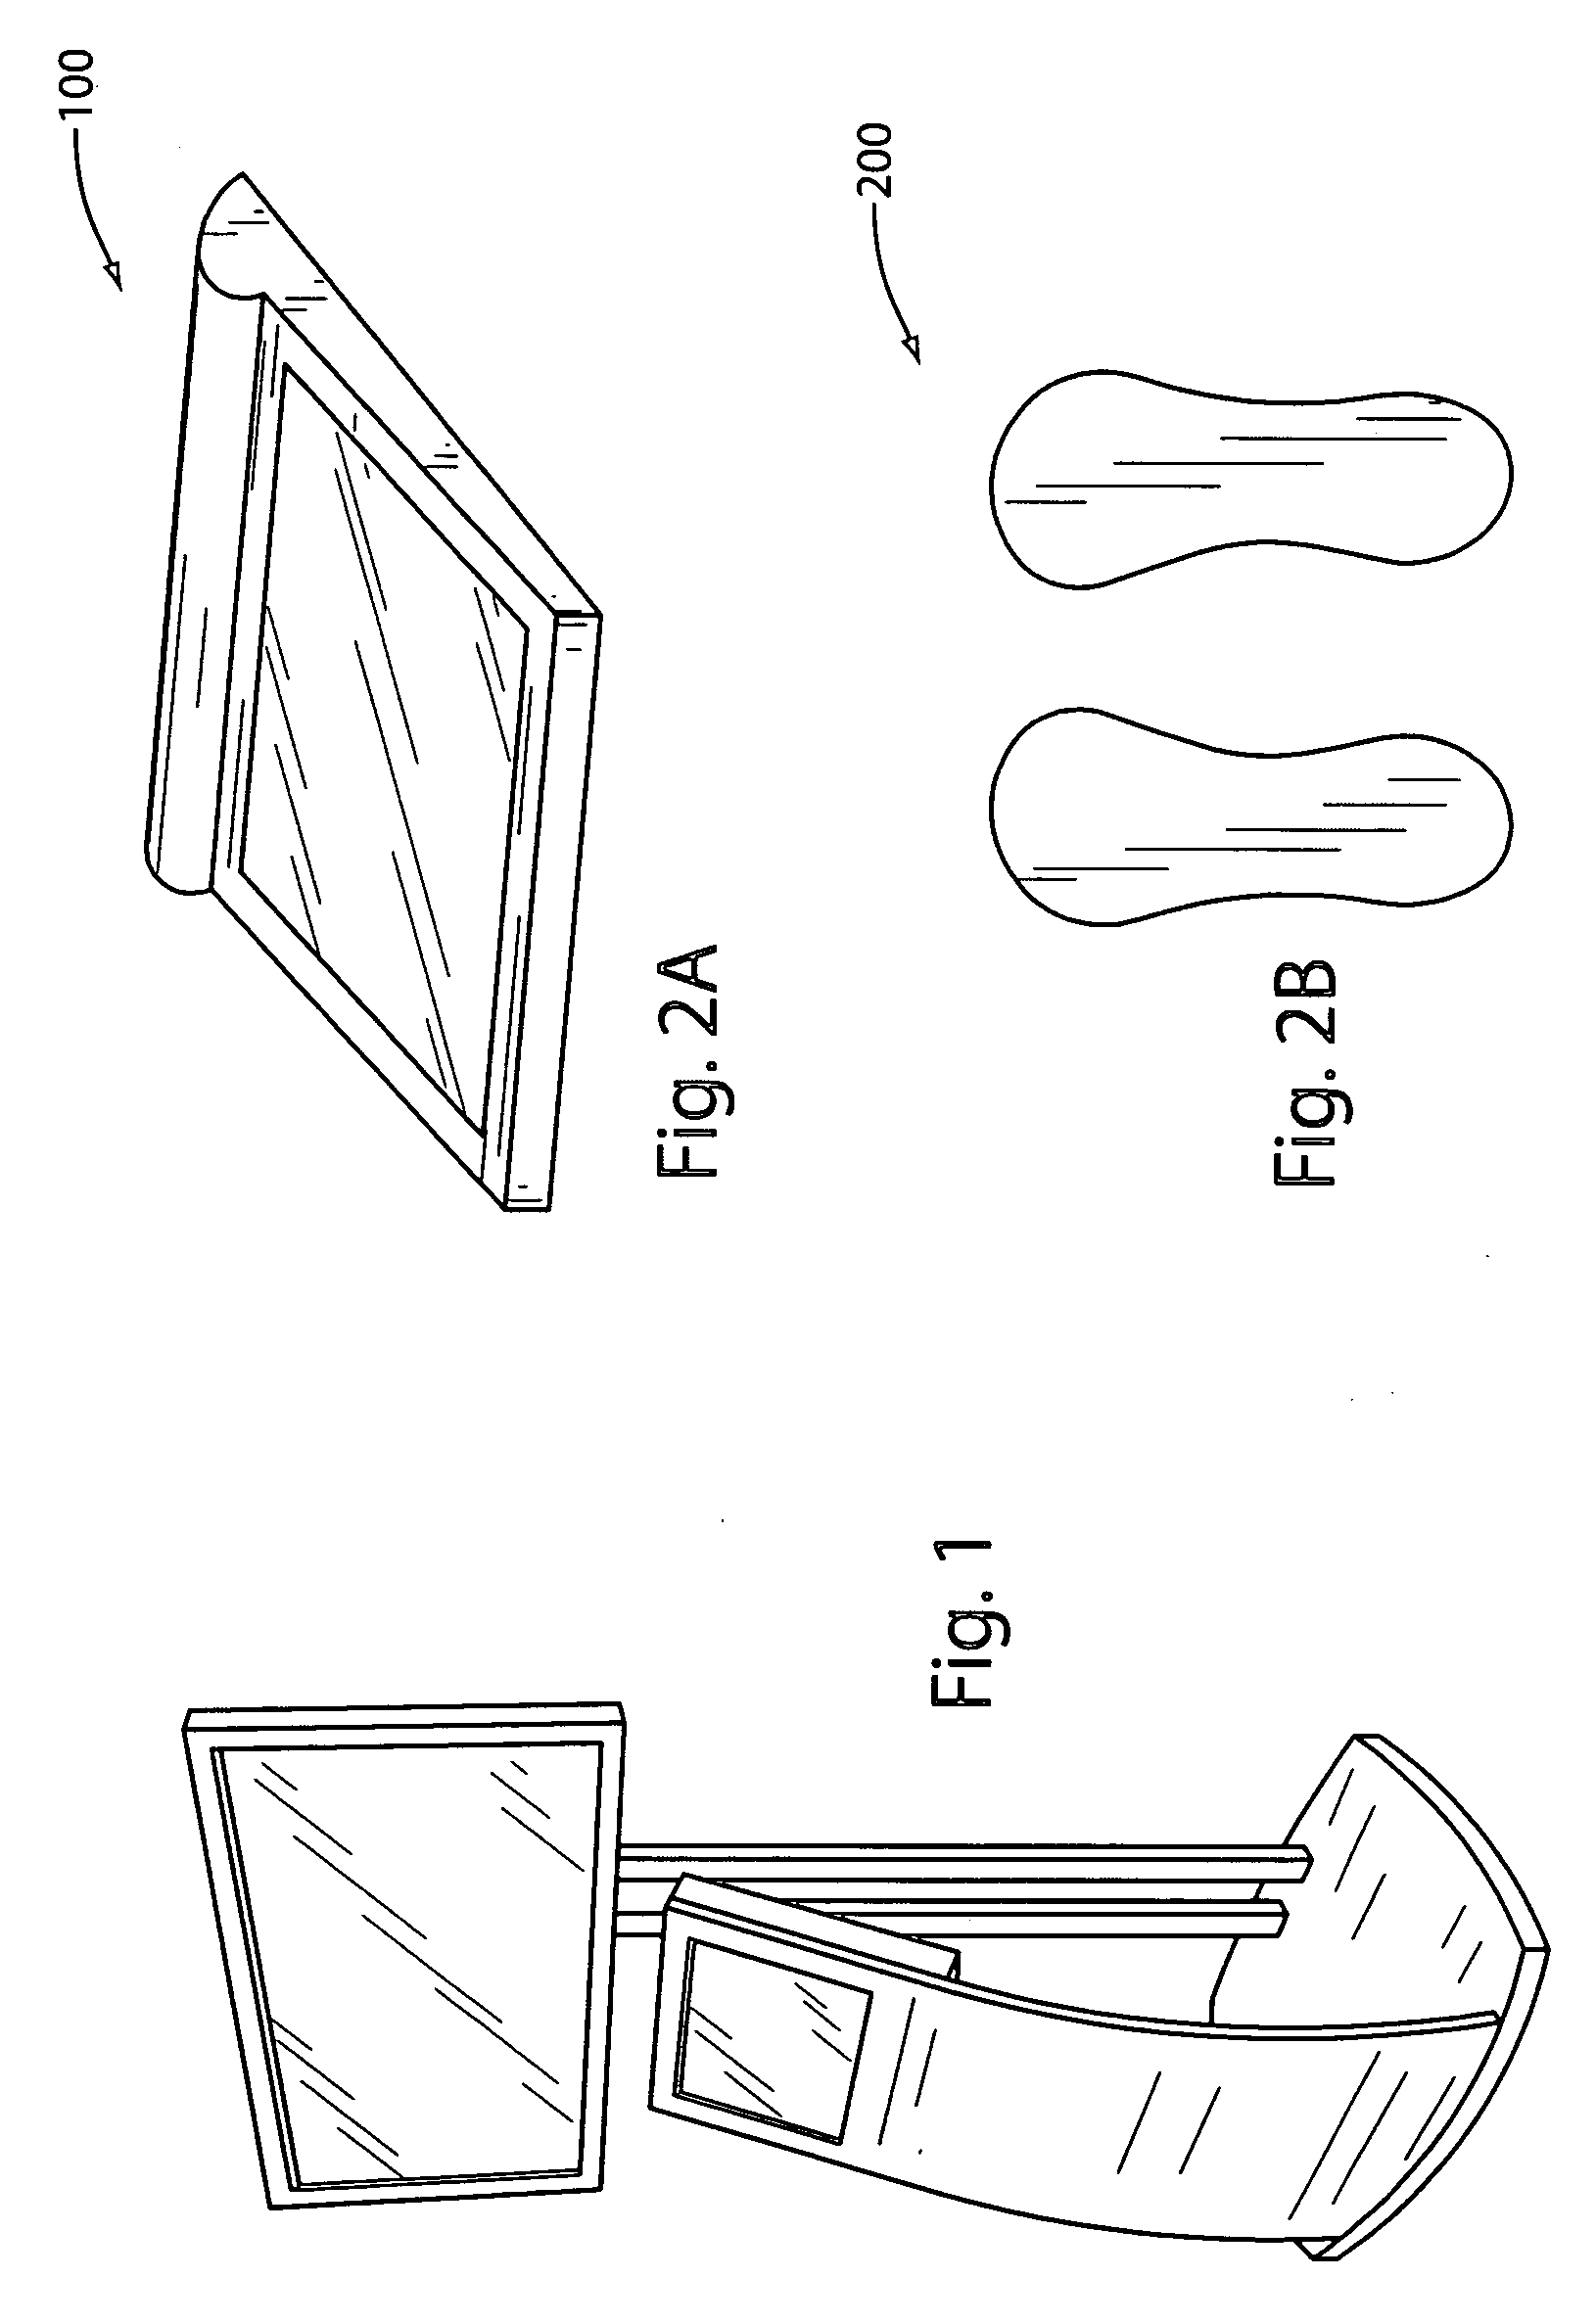 System and method for evaluating the needs of a person and manufacturing a custom orthotic device